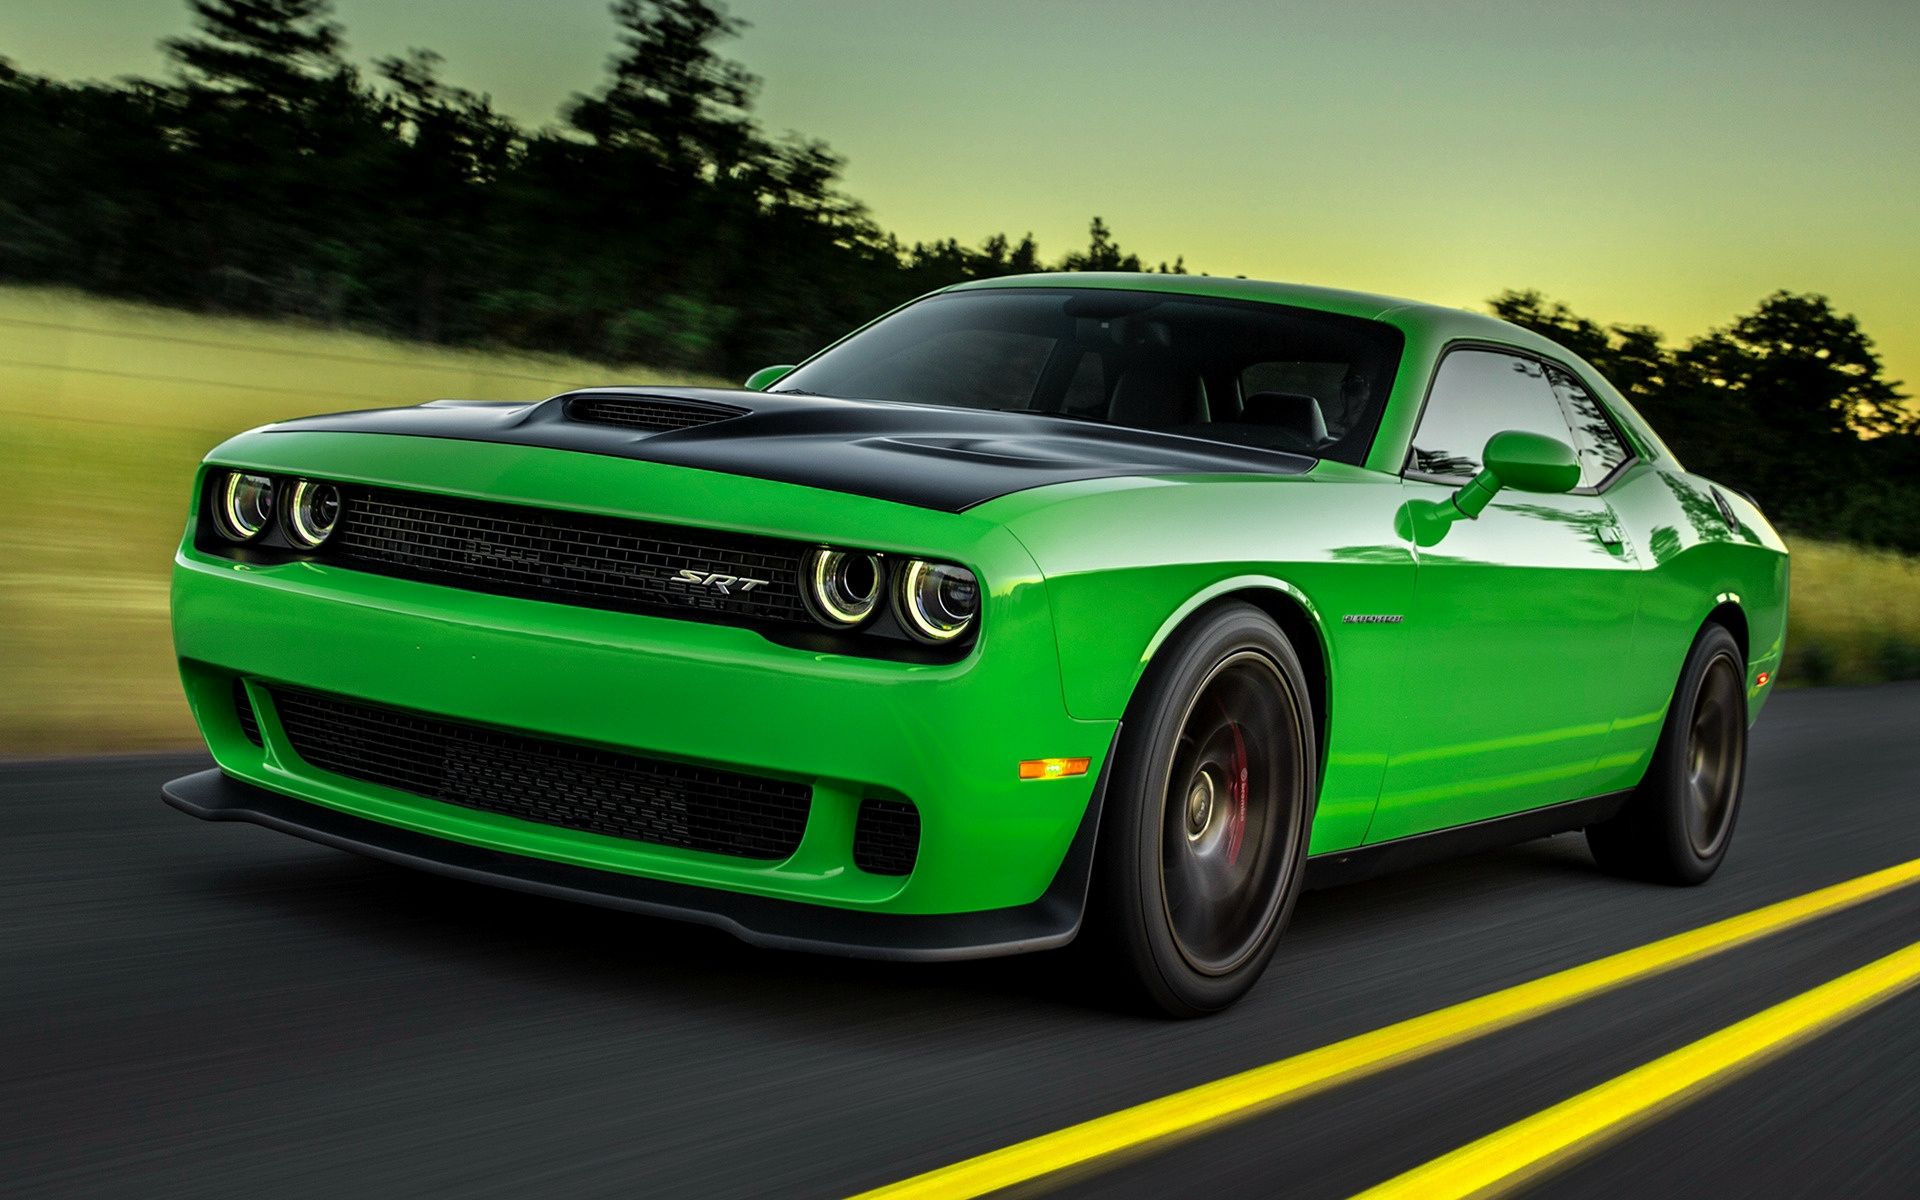 Hellcat Wallpaper Awesome Dodge Challenger Srt Hellcat 2015 Wallpaper and HD Car Pixel This Week of The Hudson